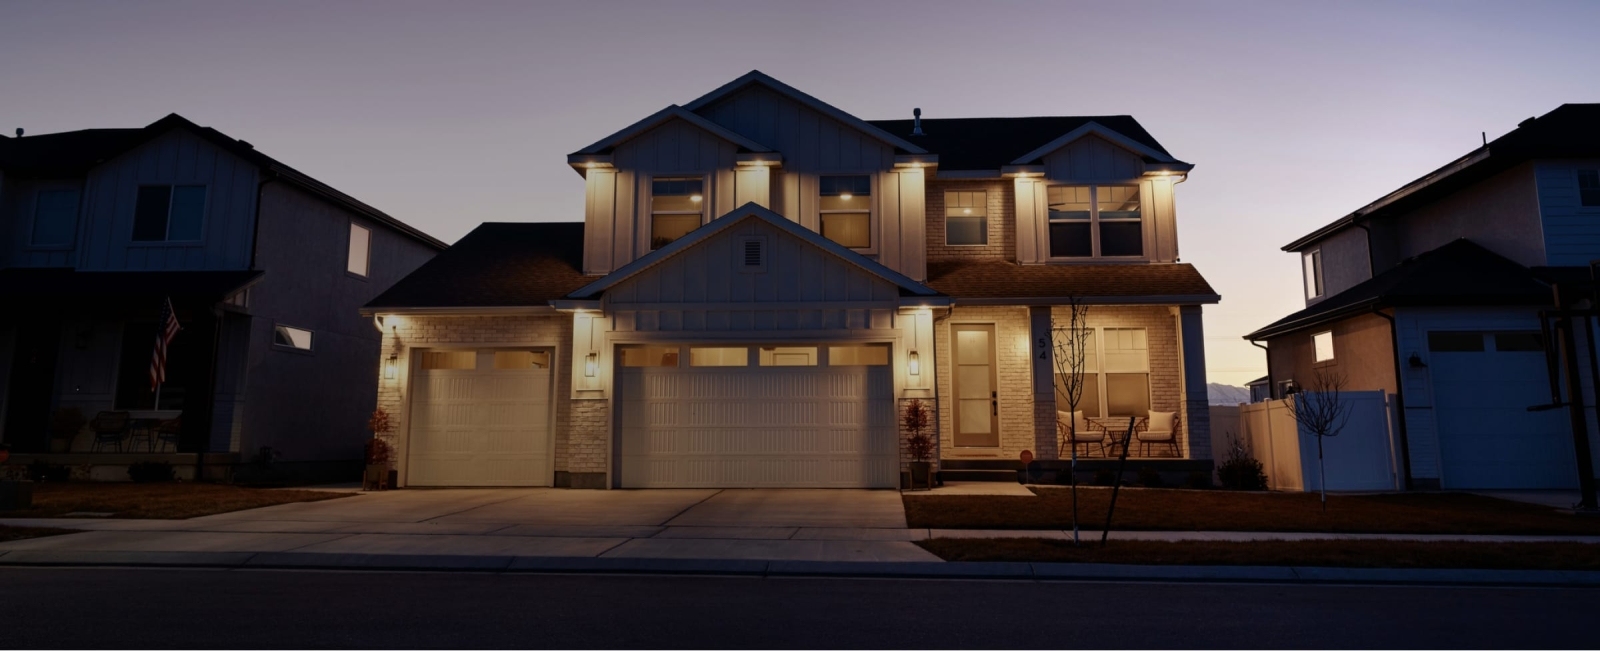 Outside of a Vivint protected home at night